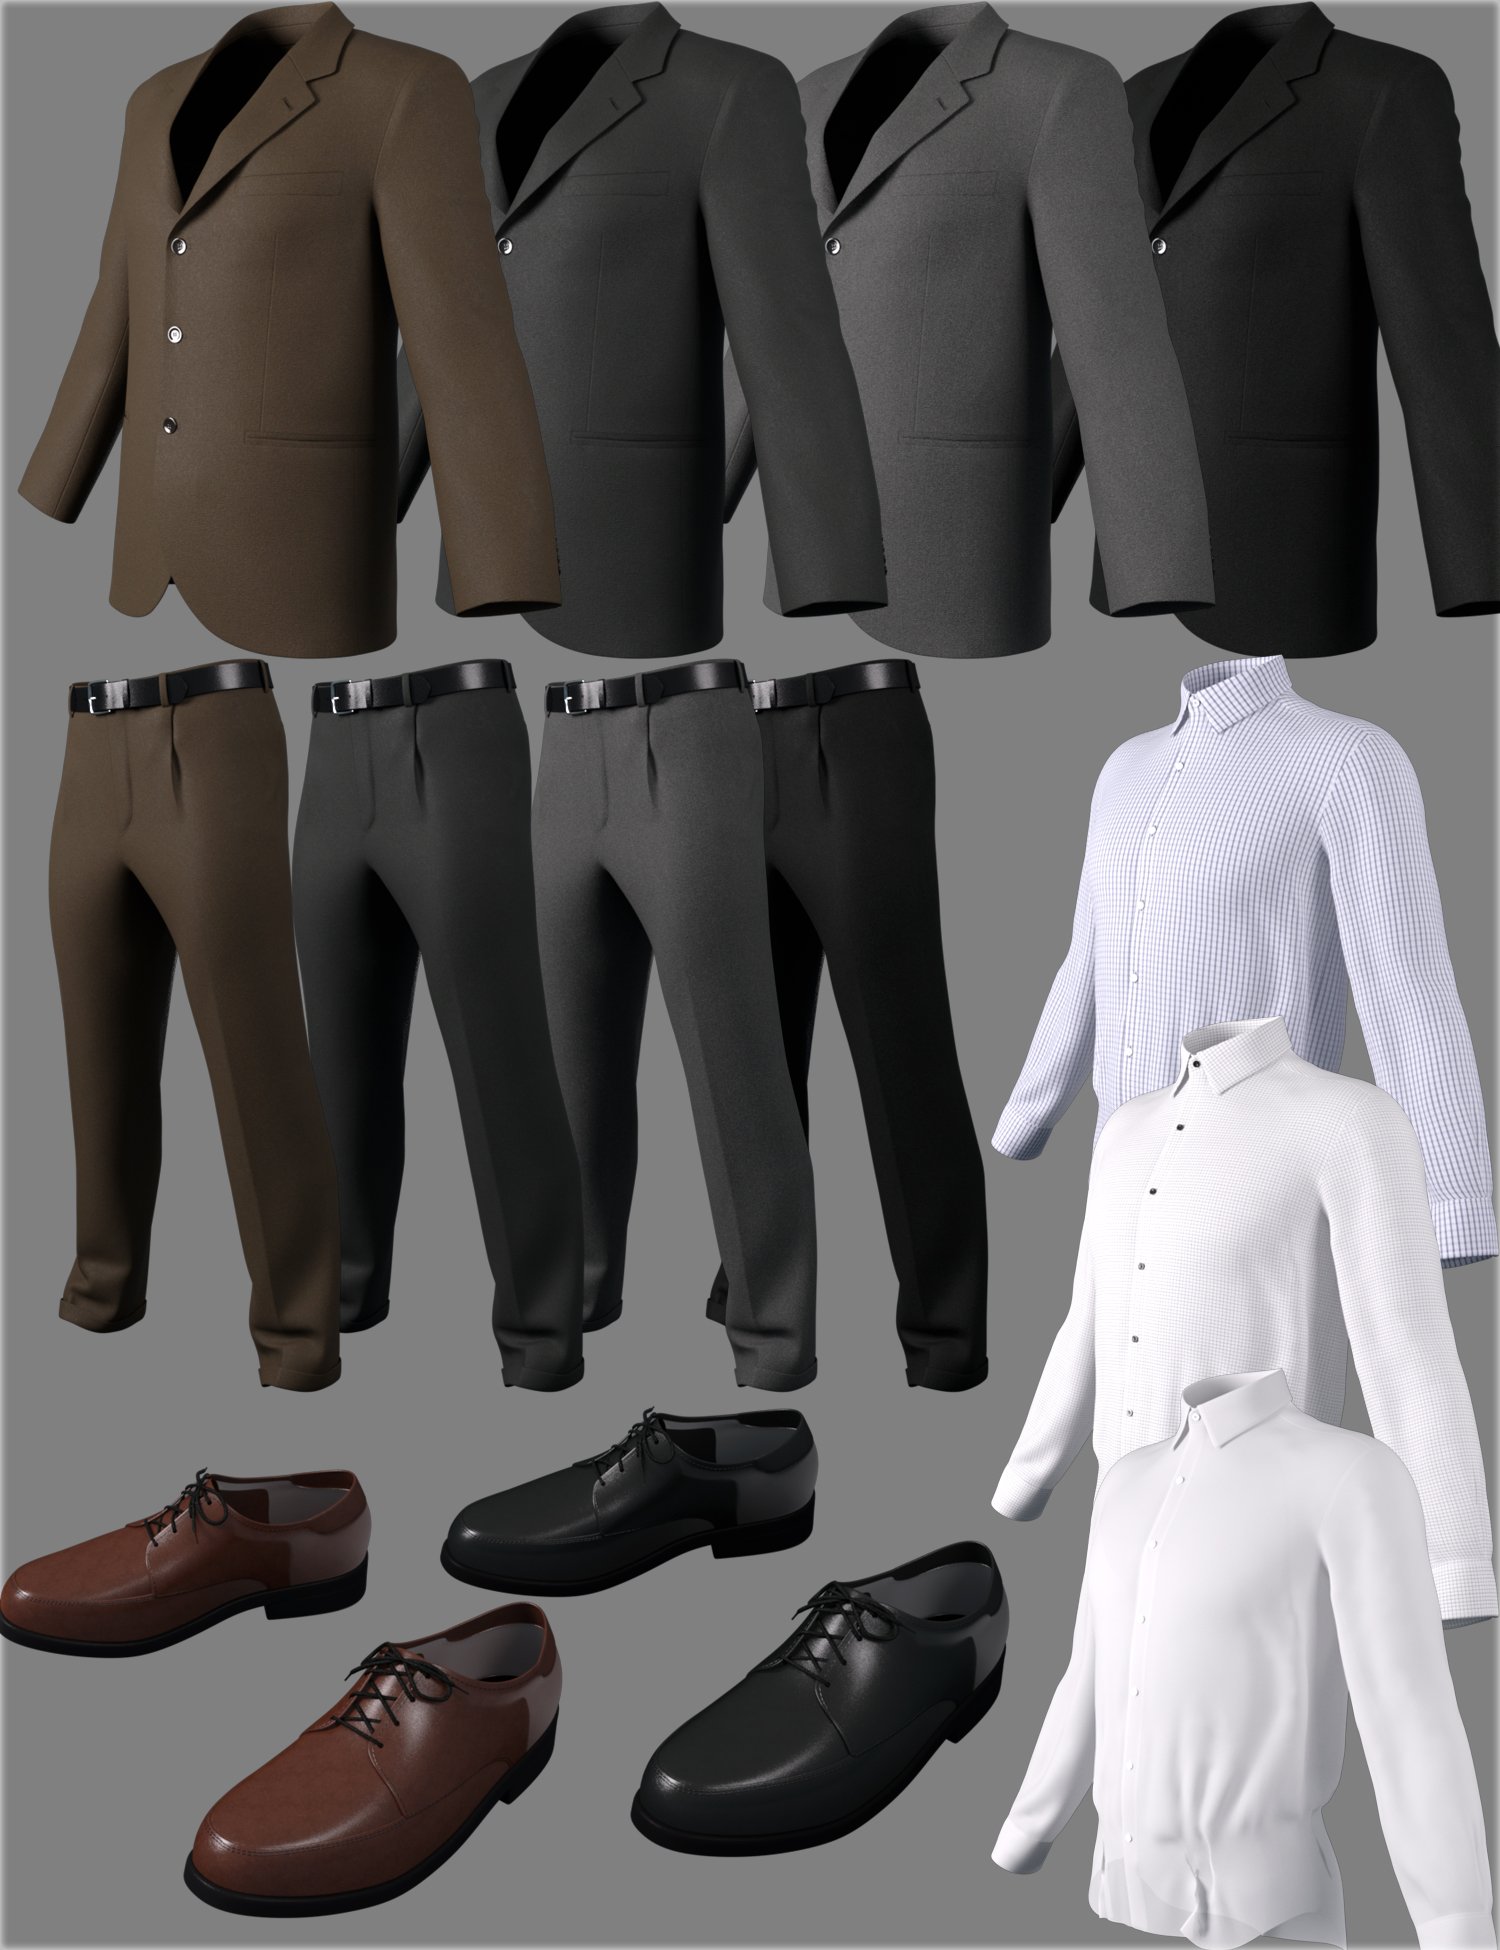 dForce HnC 3Button Suit Outfits for Genesis 8.1 Males by: IH Kang, 3D Models by Daz 3D